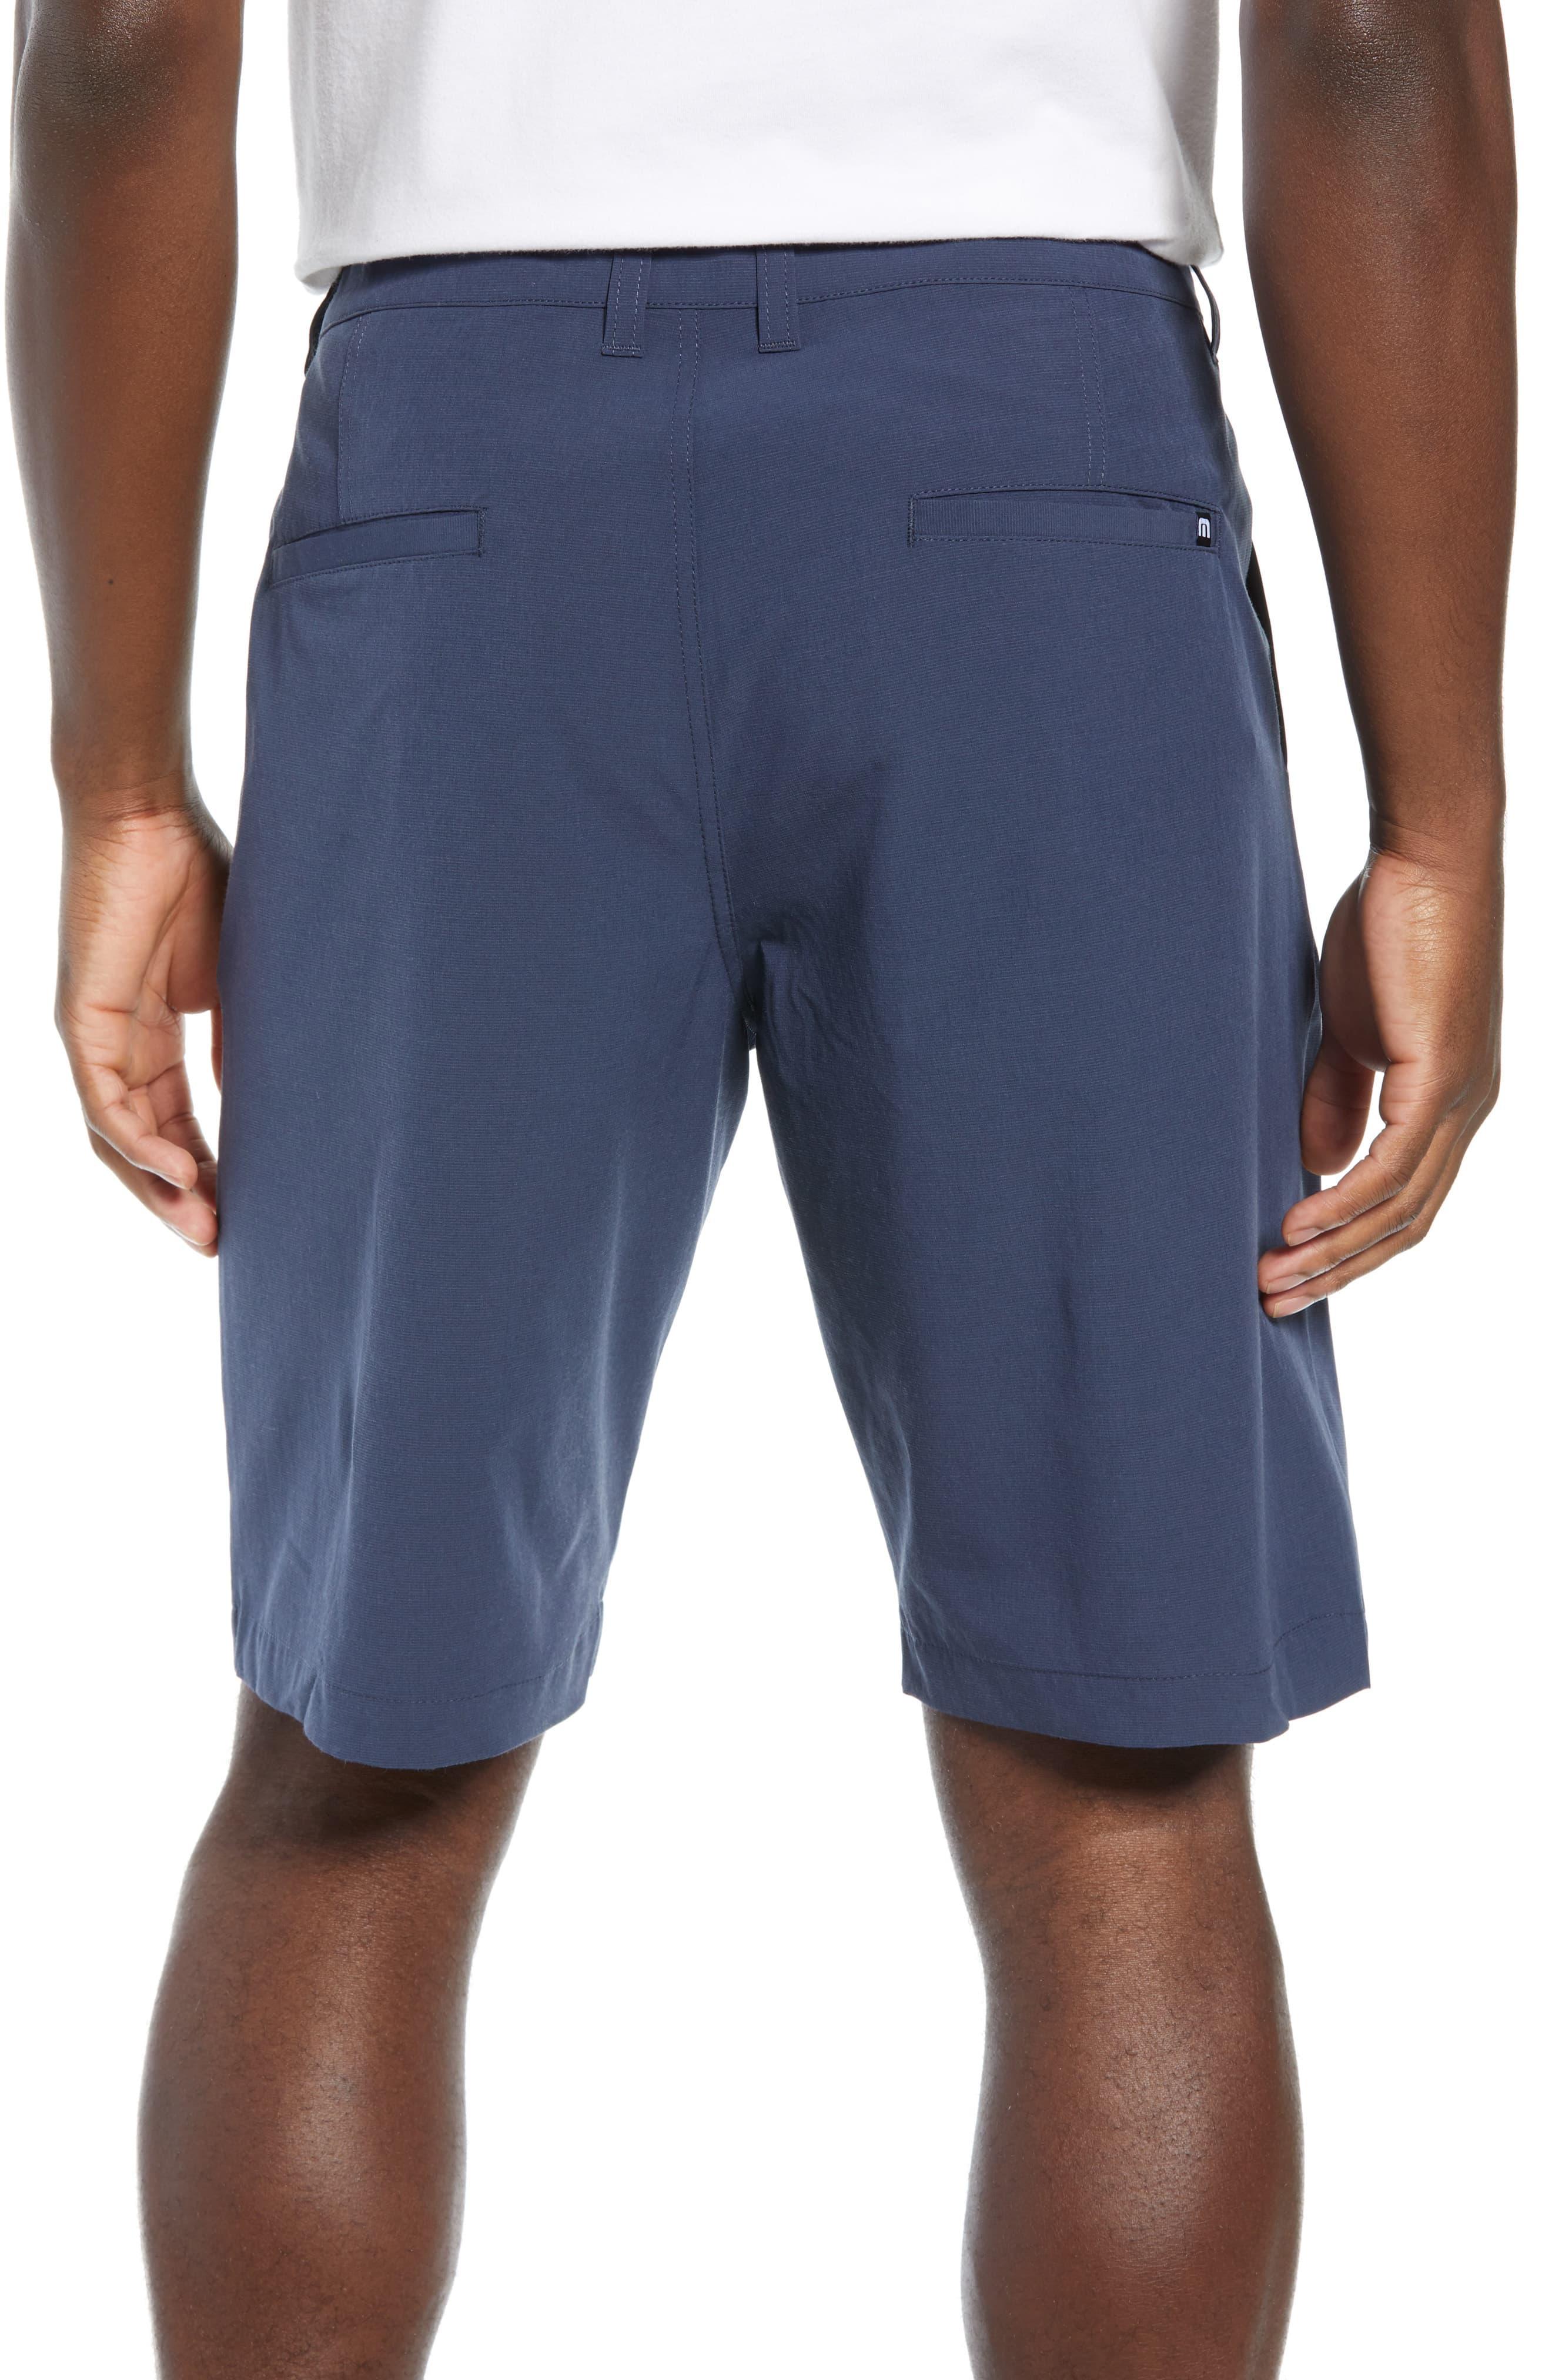 Travis Mathew Beck Stretch Performance Shorts in Blue for Men - Lyst